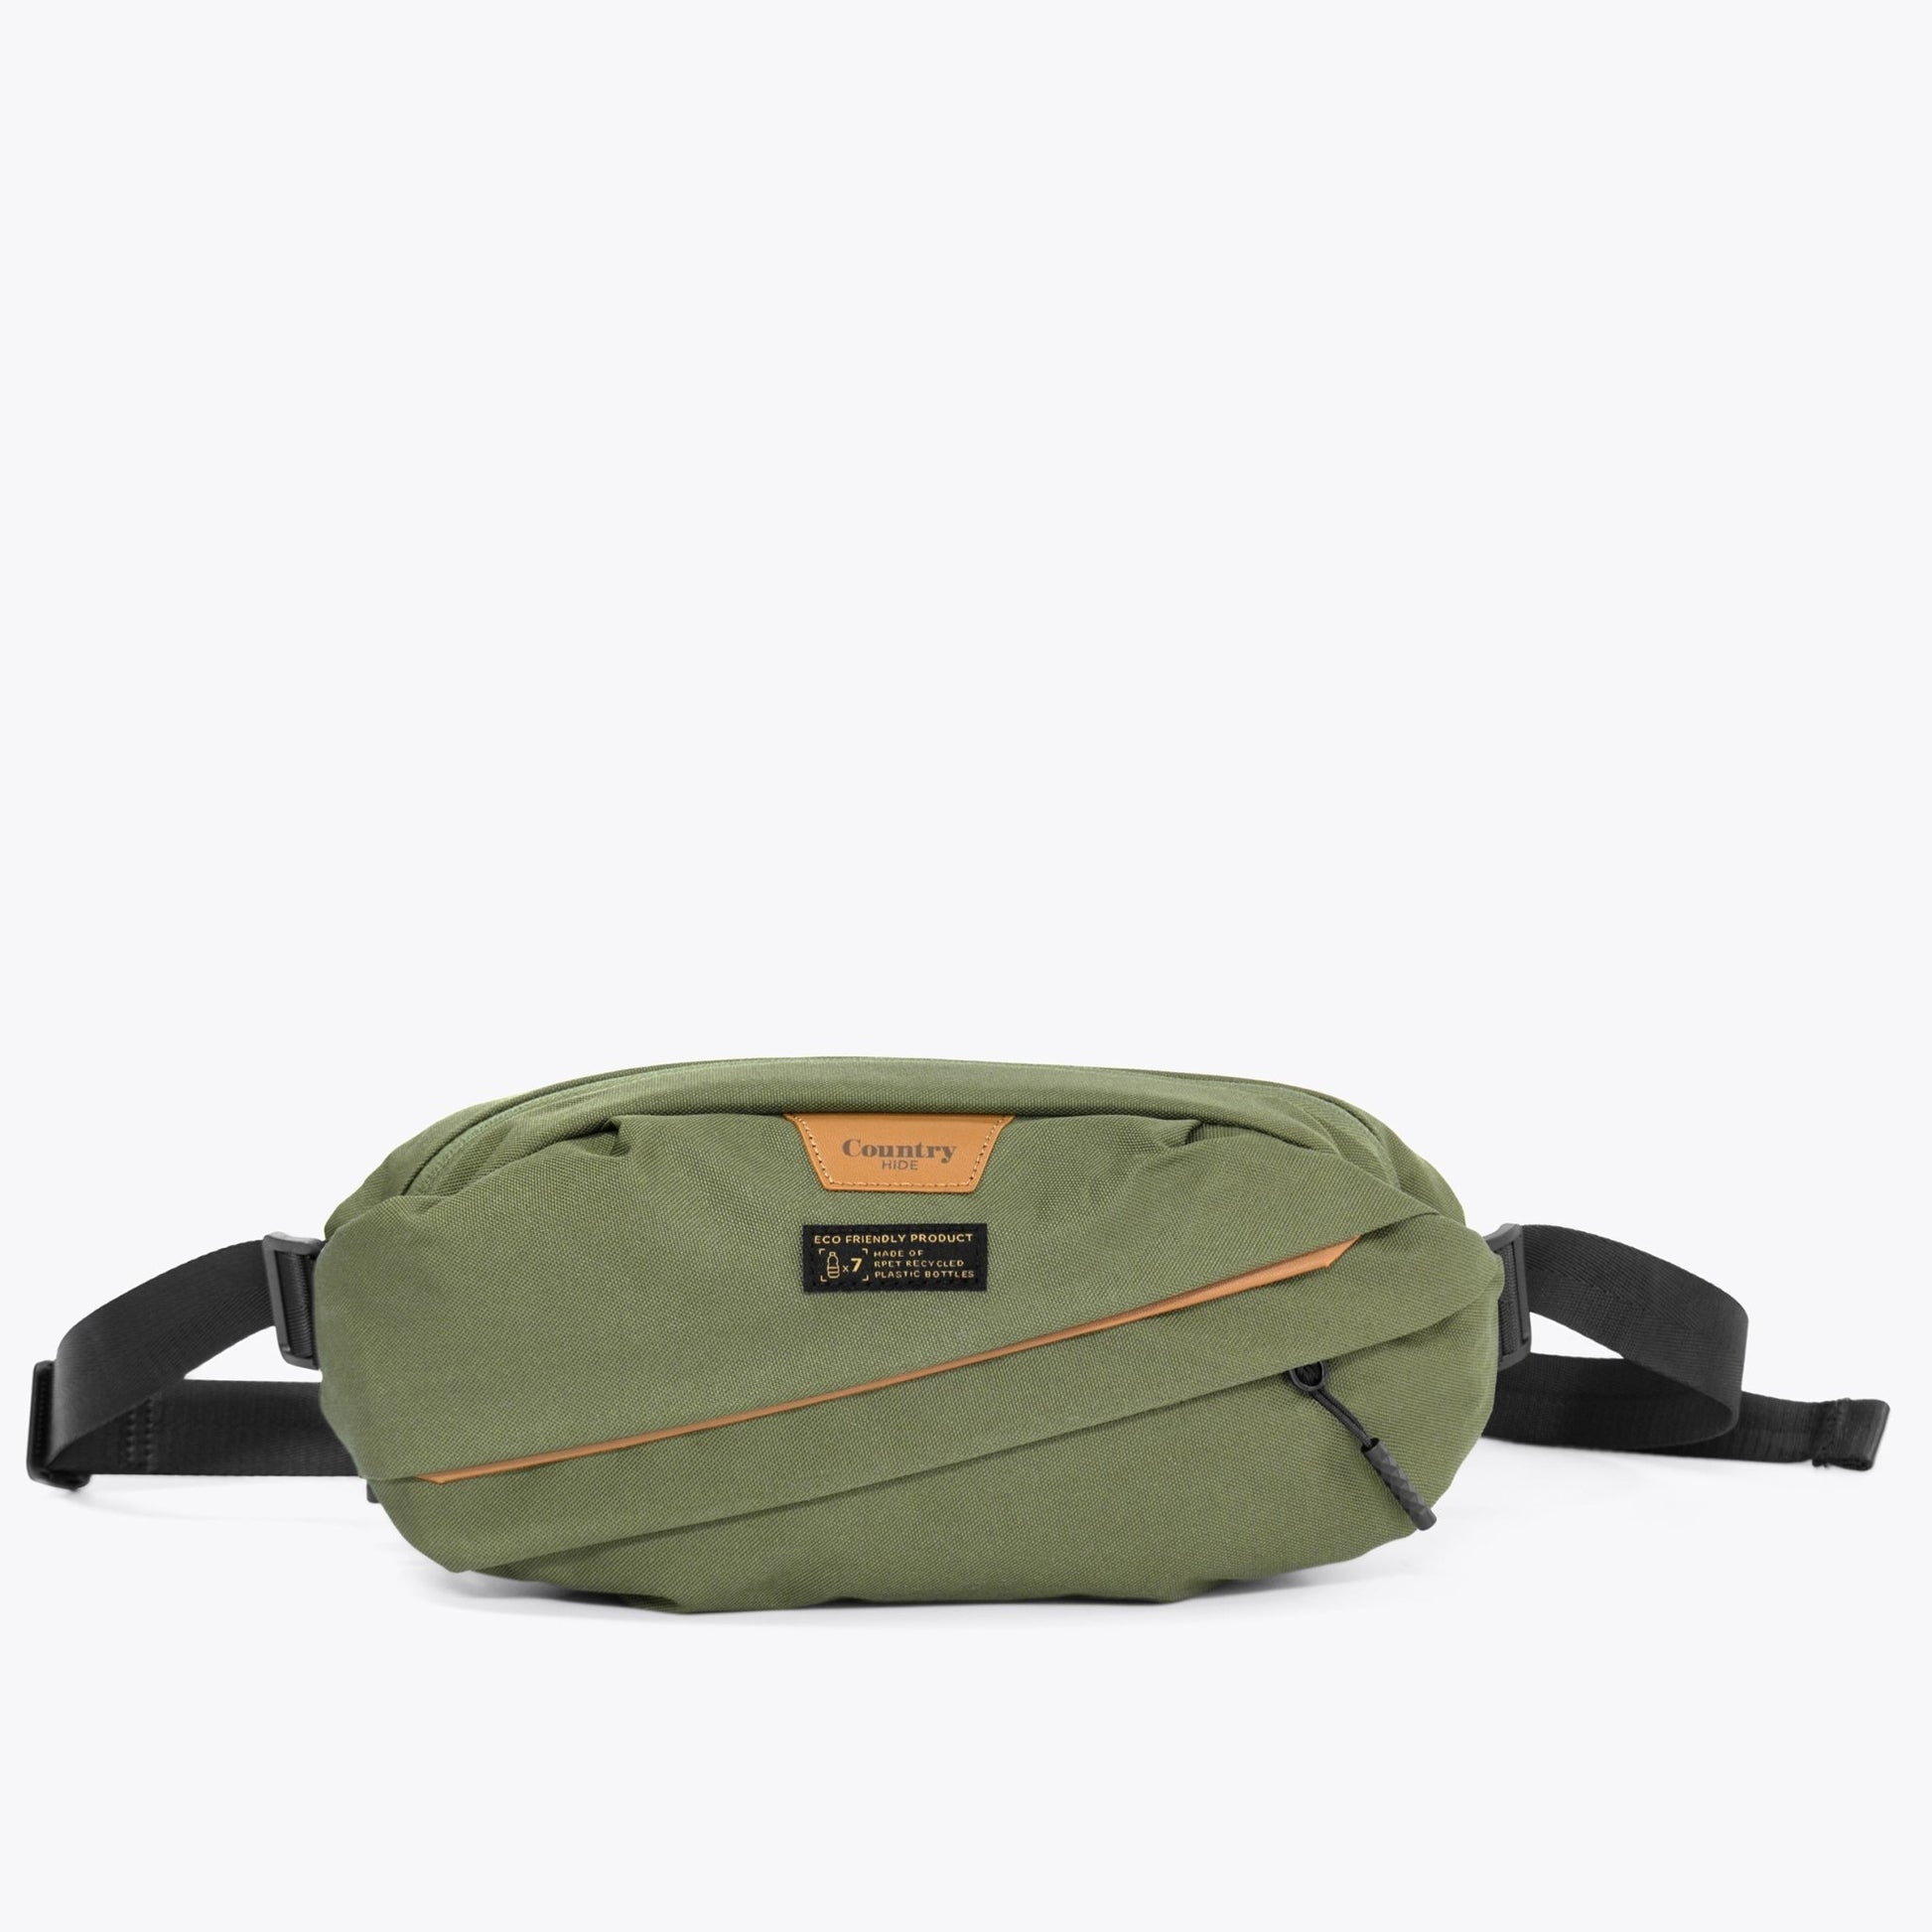 EARTH Chestbag - Olive - www.countryhide.com